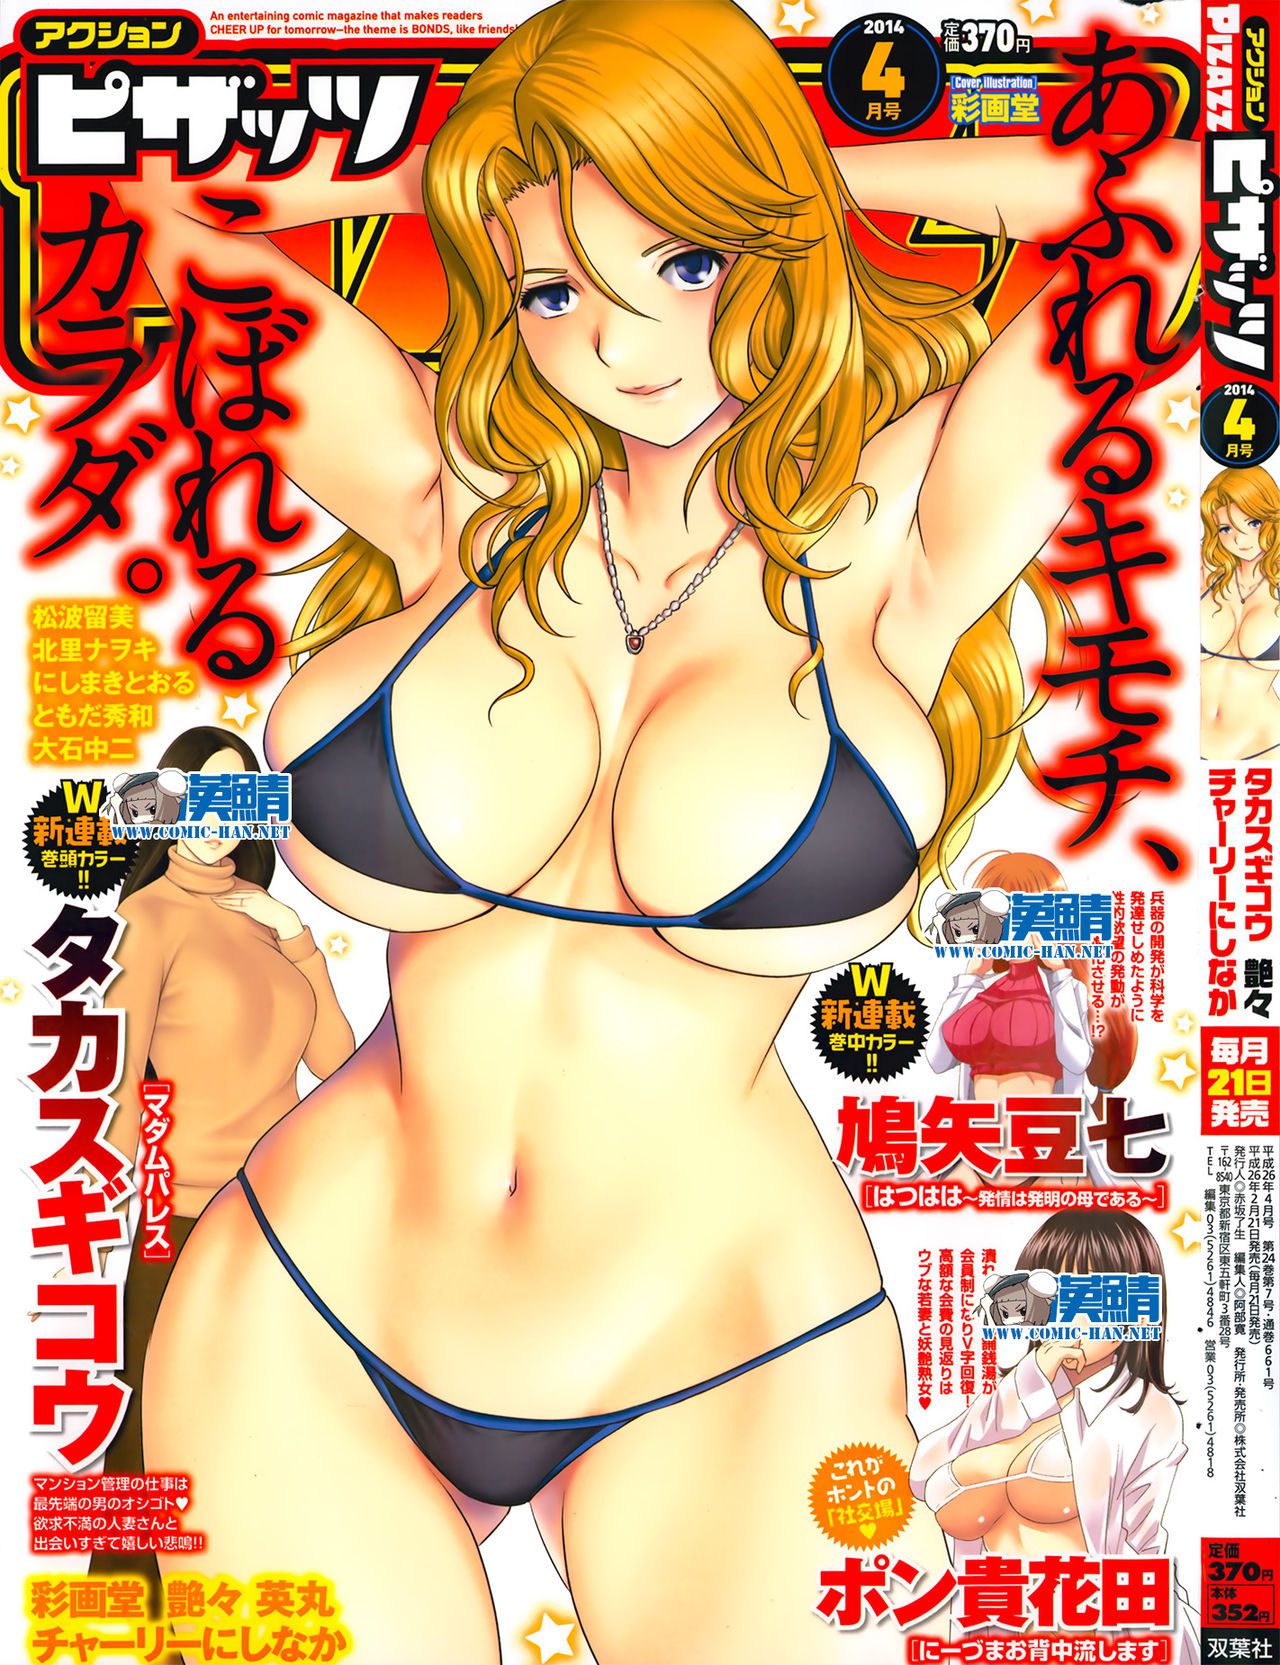 [Saigado] Cover Illustrations [彩画堂] Cover Illustrations 74